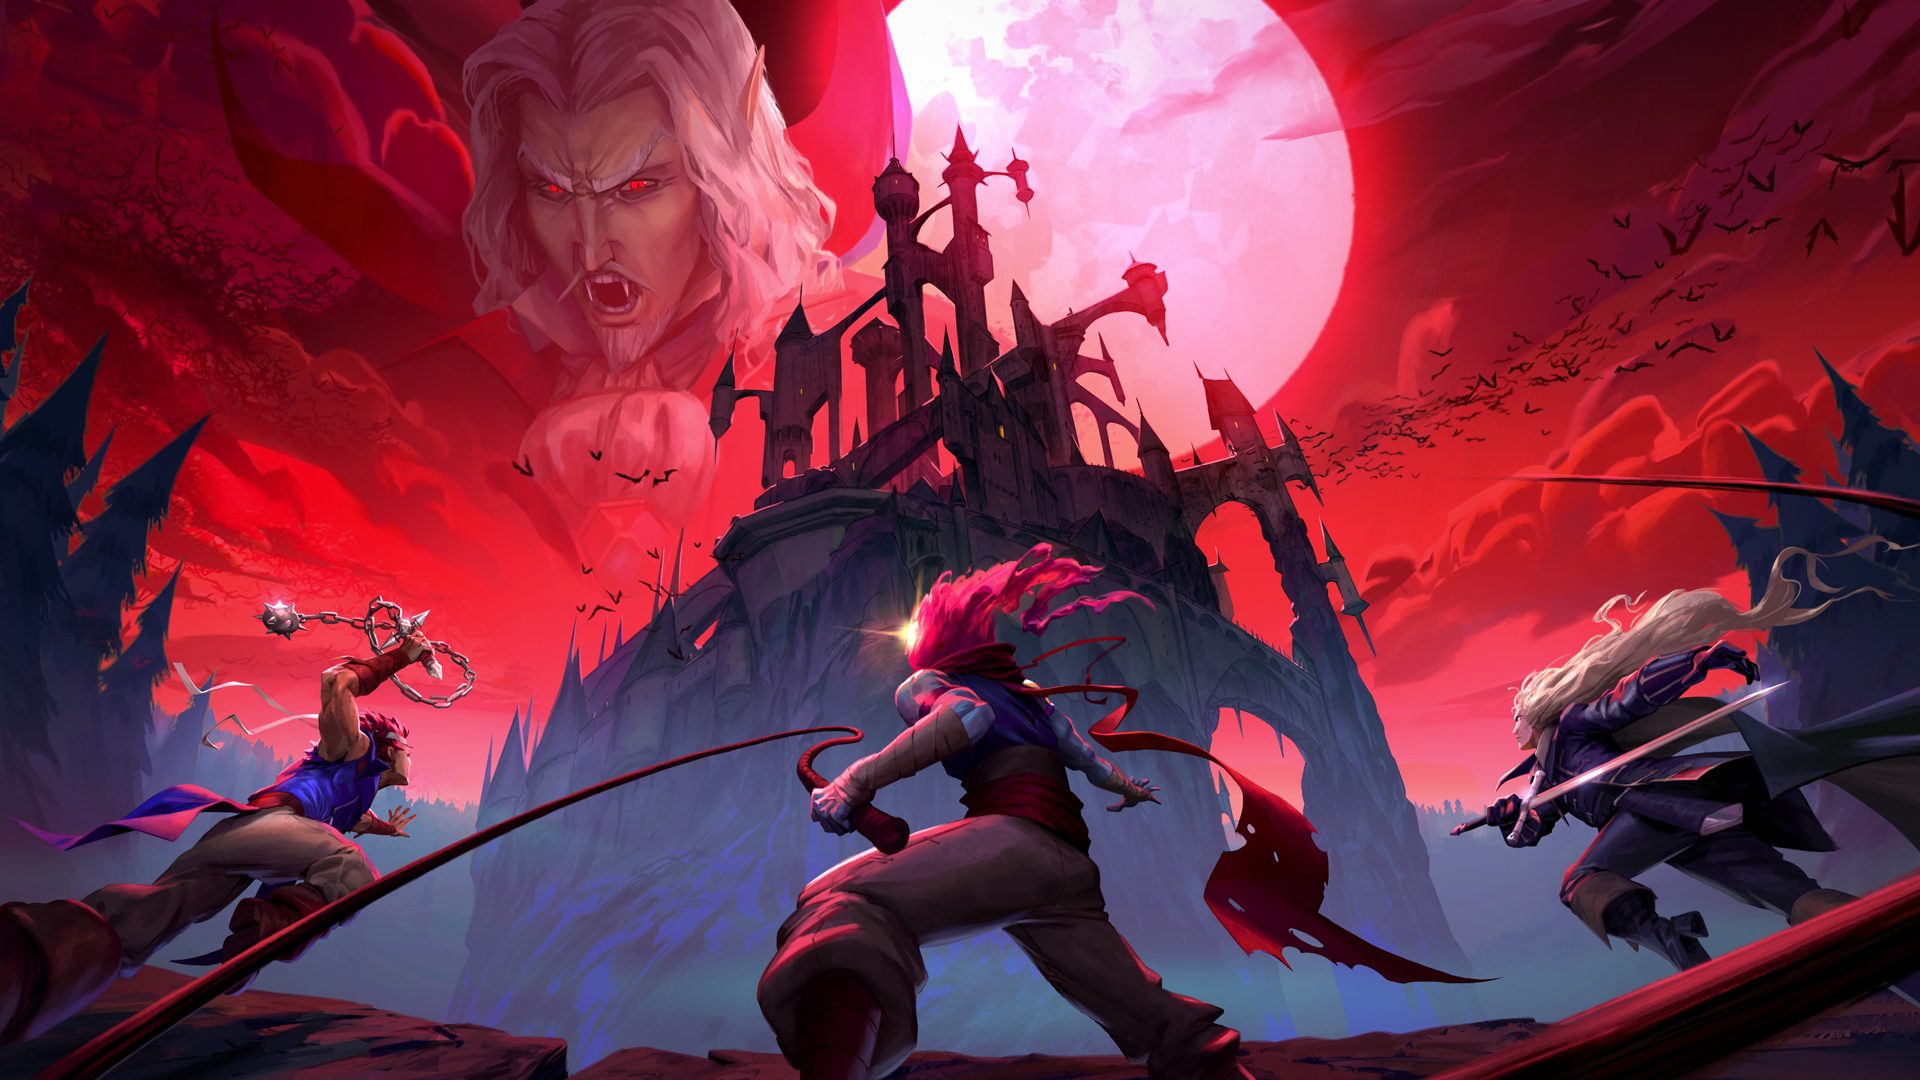 Castlevania dev's new game for Xbox One, PS4 is completely